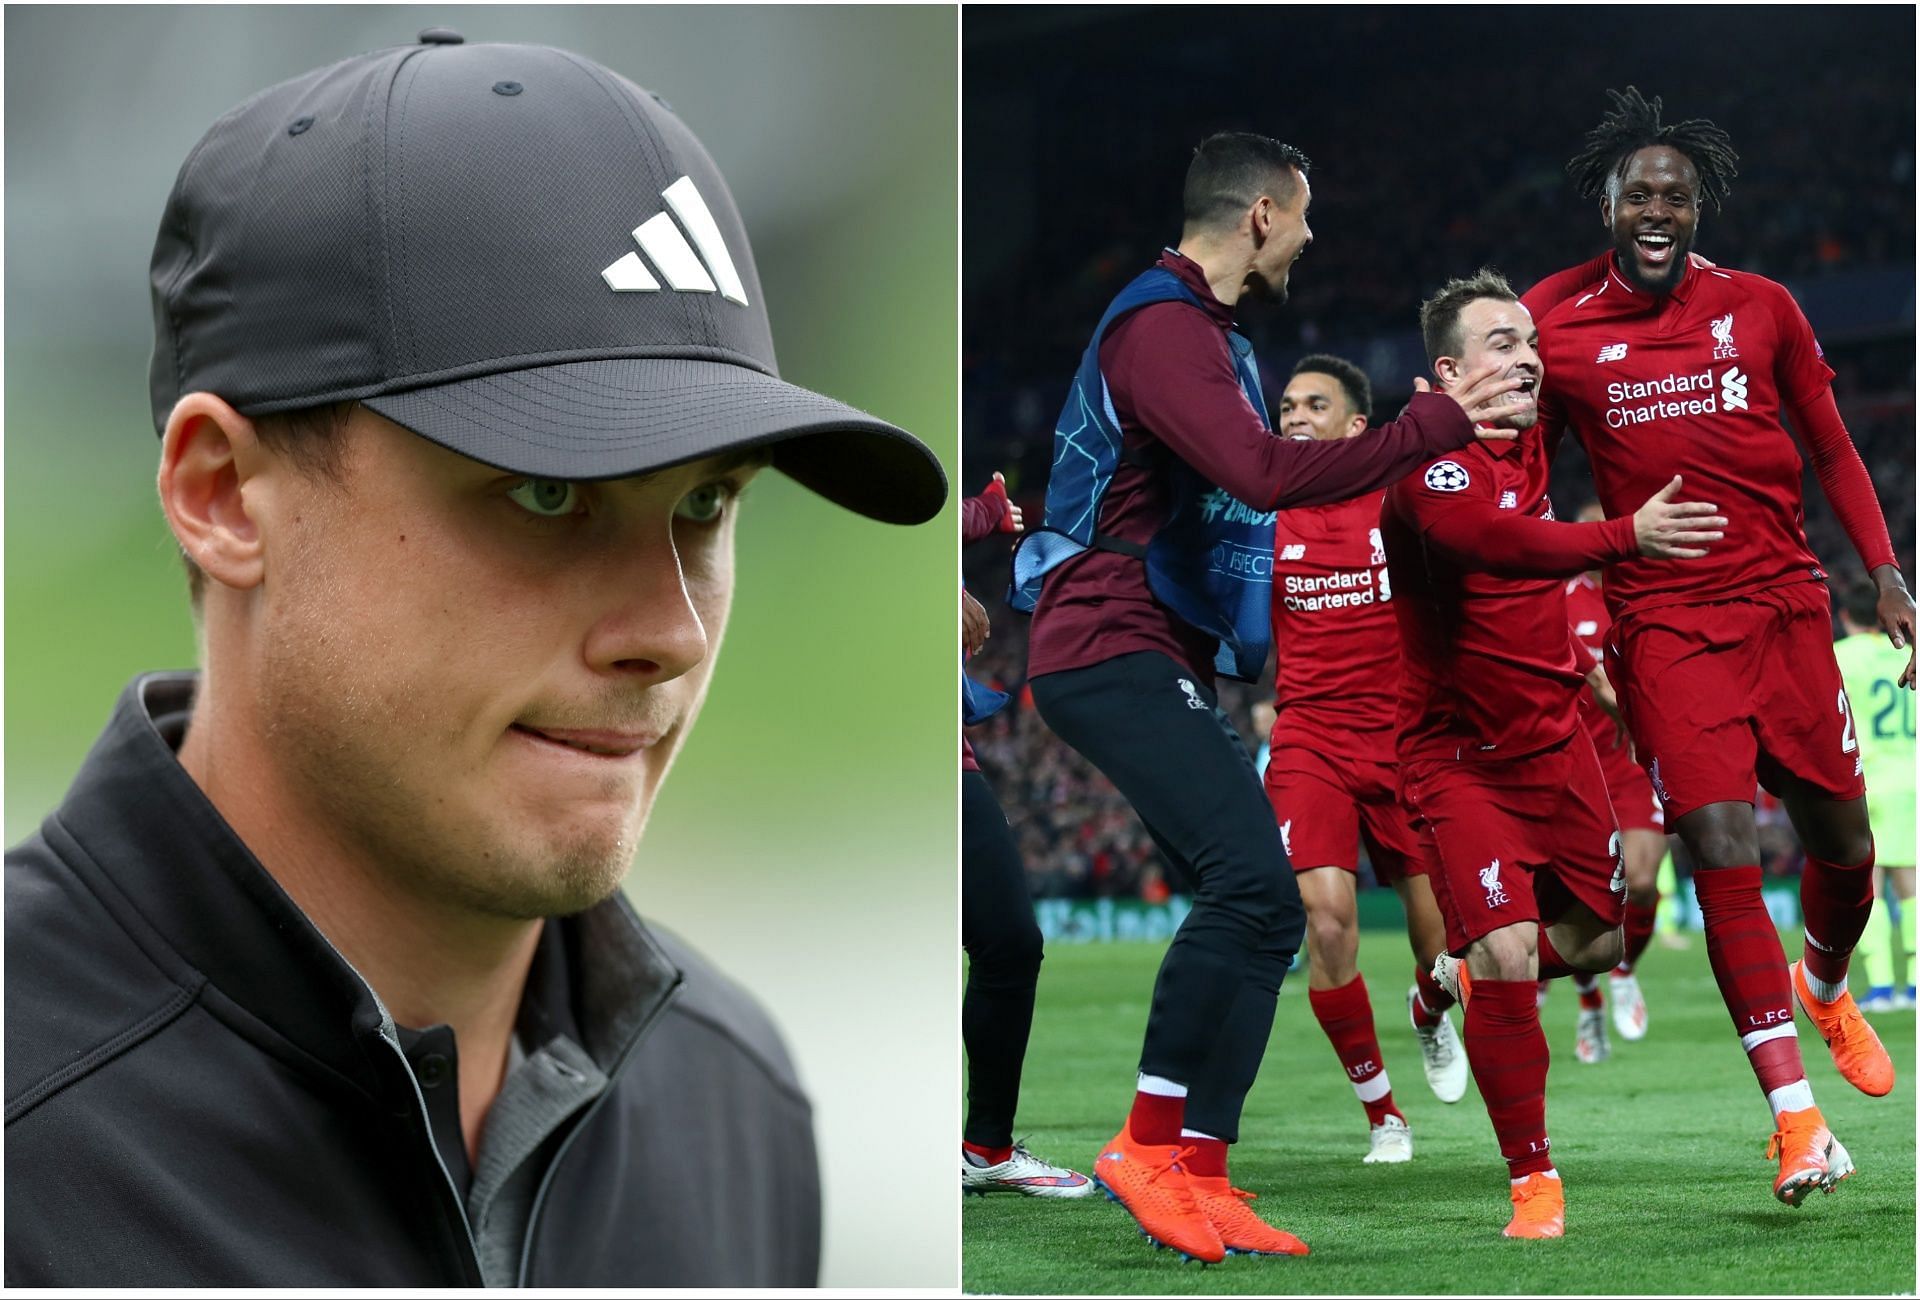 Ludvig Aberg (Left) &amp; Liverpool players celebrate their win against Barcelona in the UCL semi final (Right) (via Getty Images)